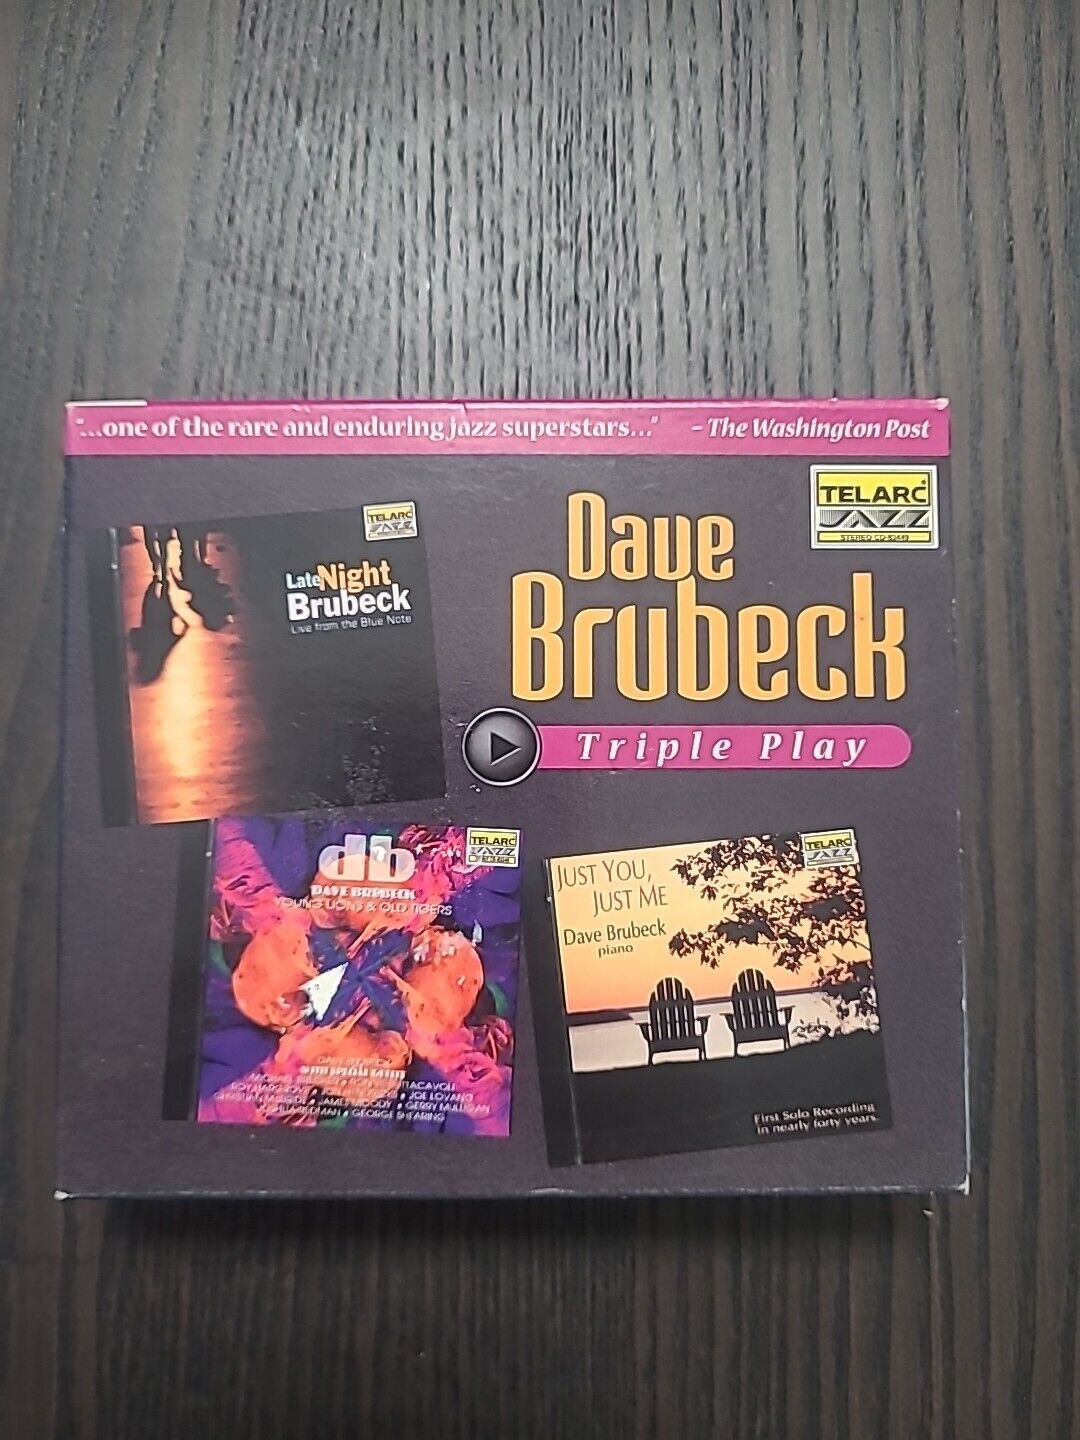 Triple Play by Brubeck, Dave (CD, 1998)